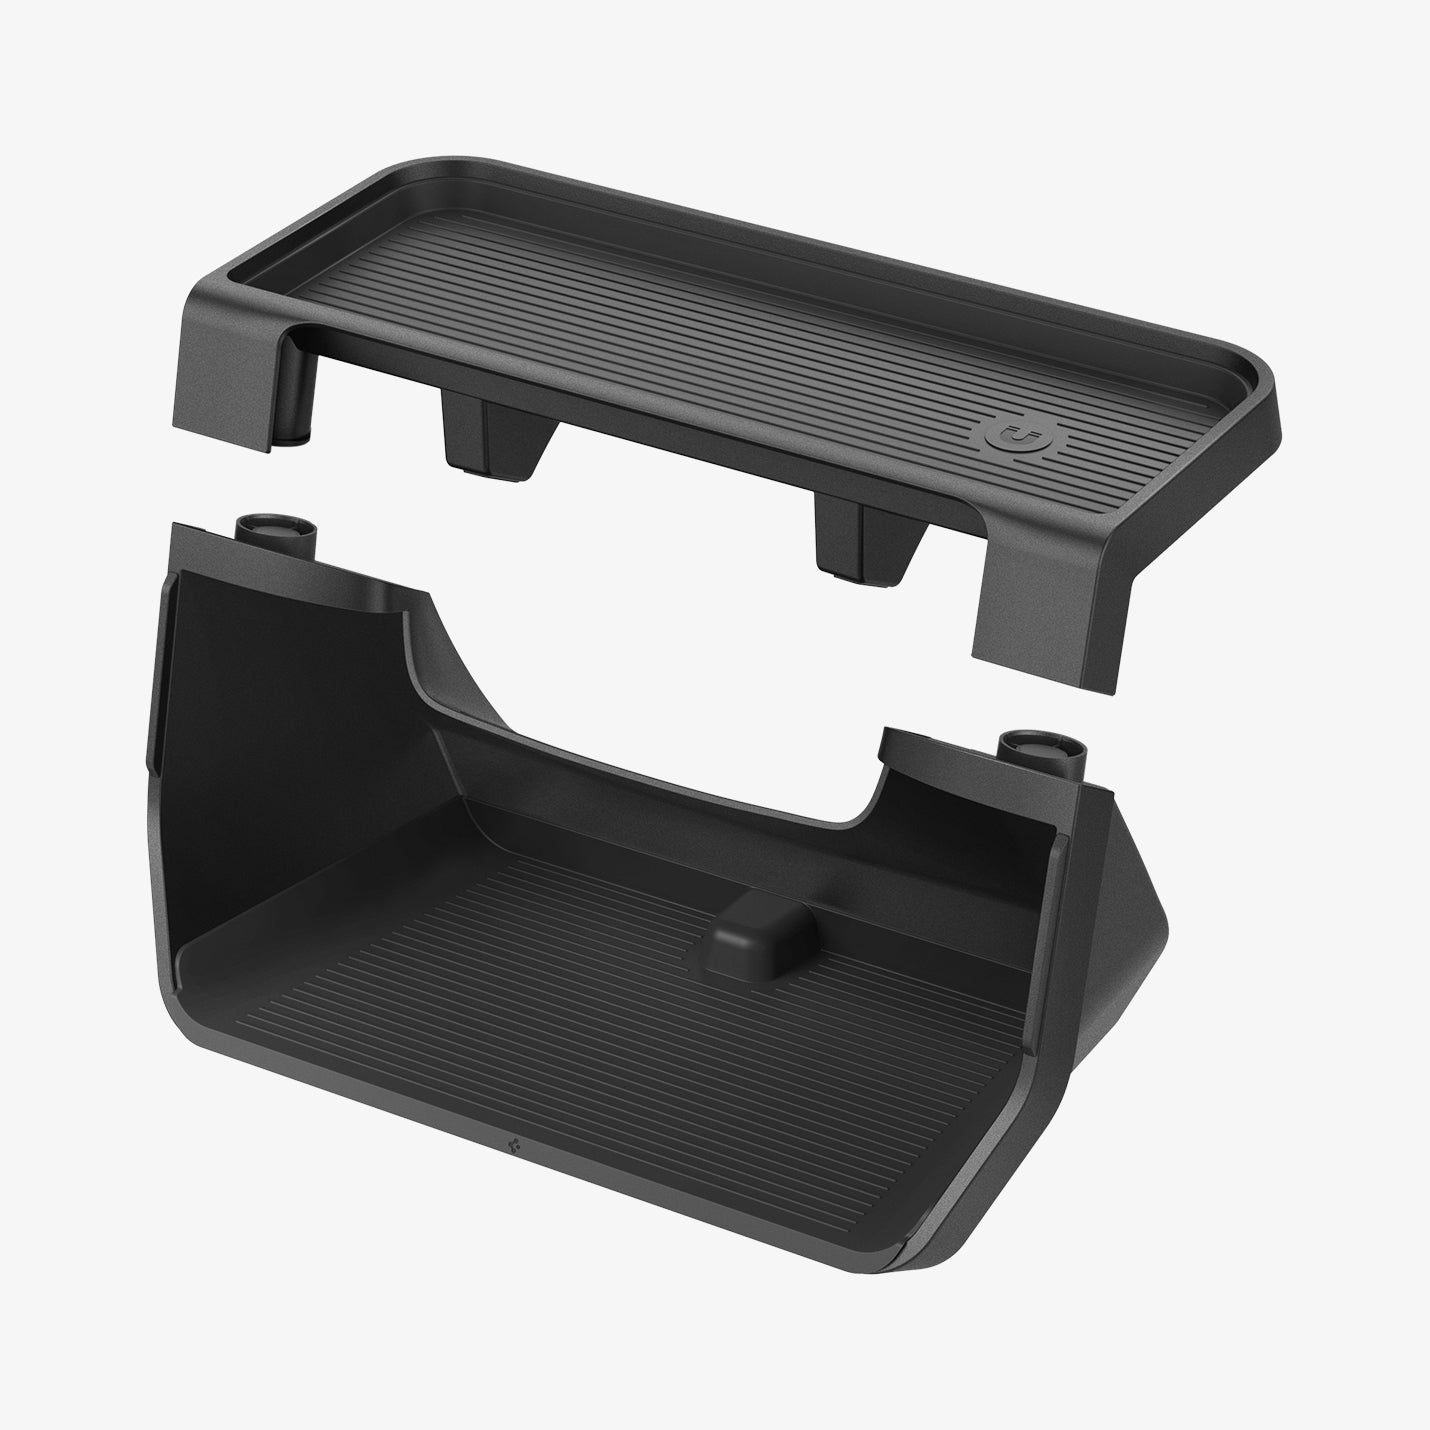 ACP07280 - Tesla Model Y & 3 Under Screen Organizer TO227 in Black showing the top layer detached from the bottom inner layer of the organizer